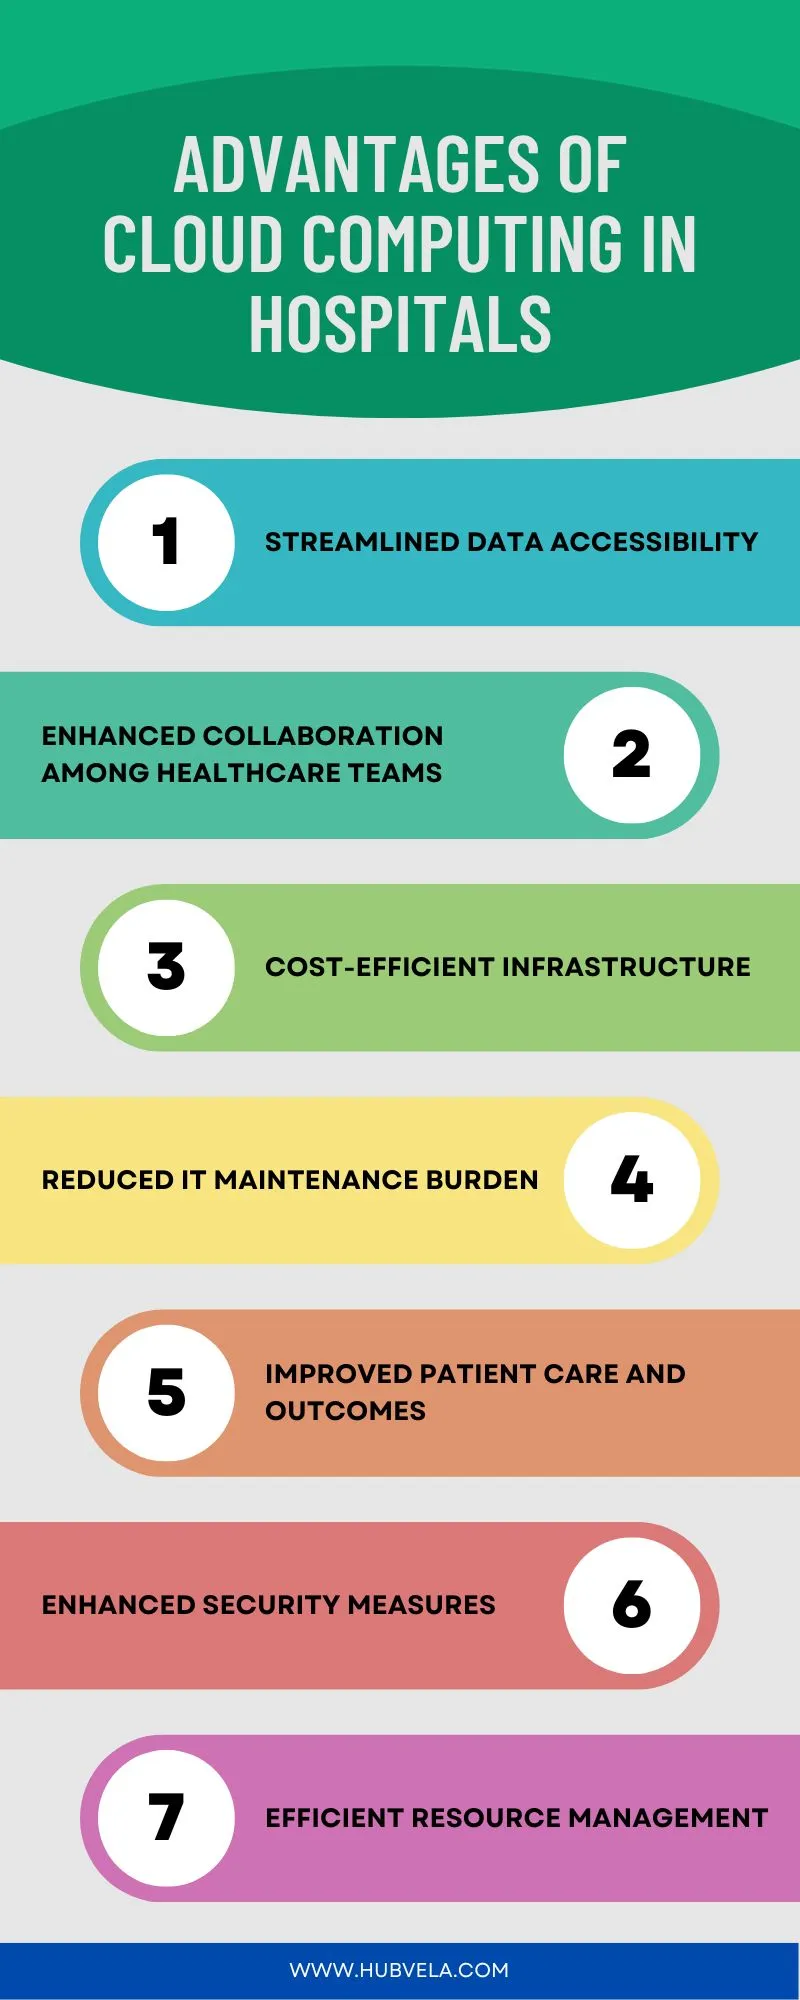 Advantages of Cloud Computing in Hospitals Infographic